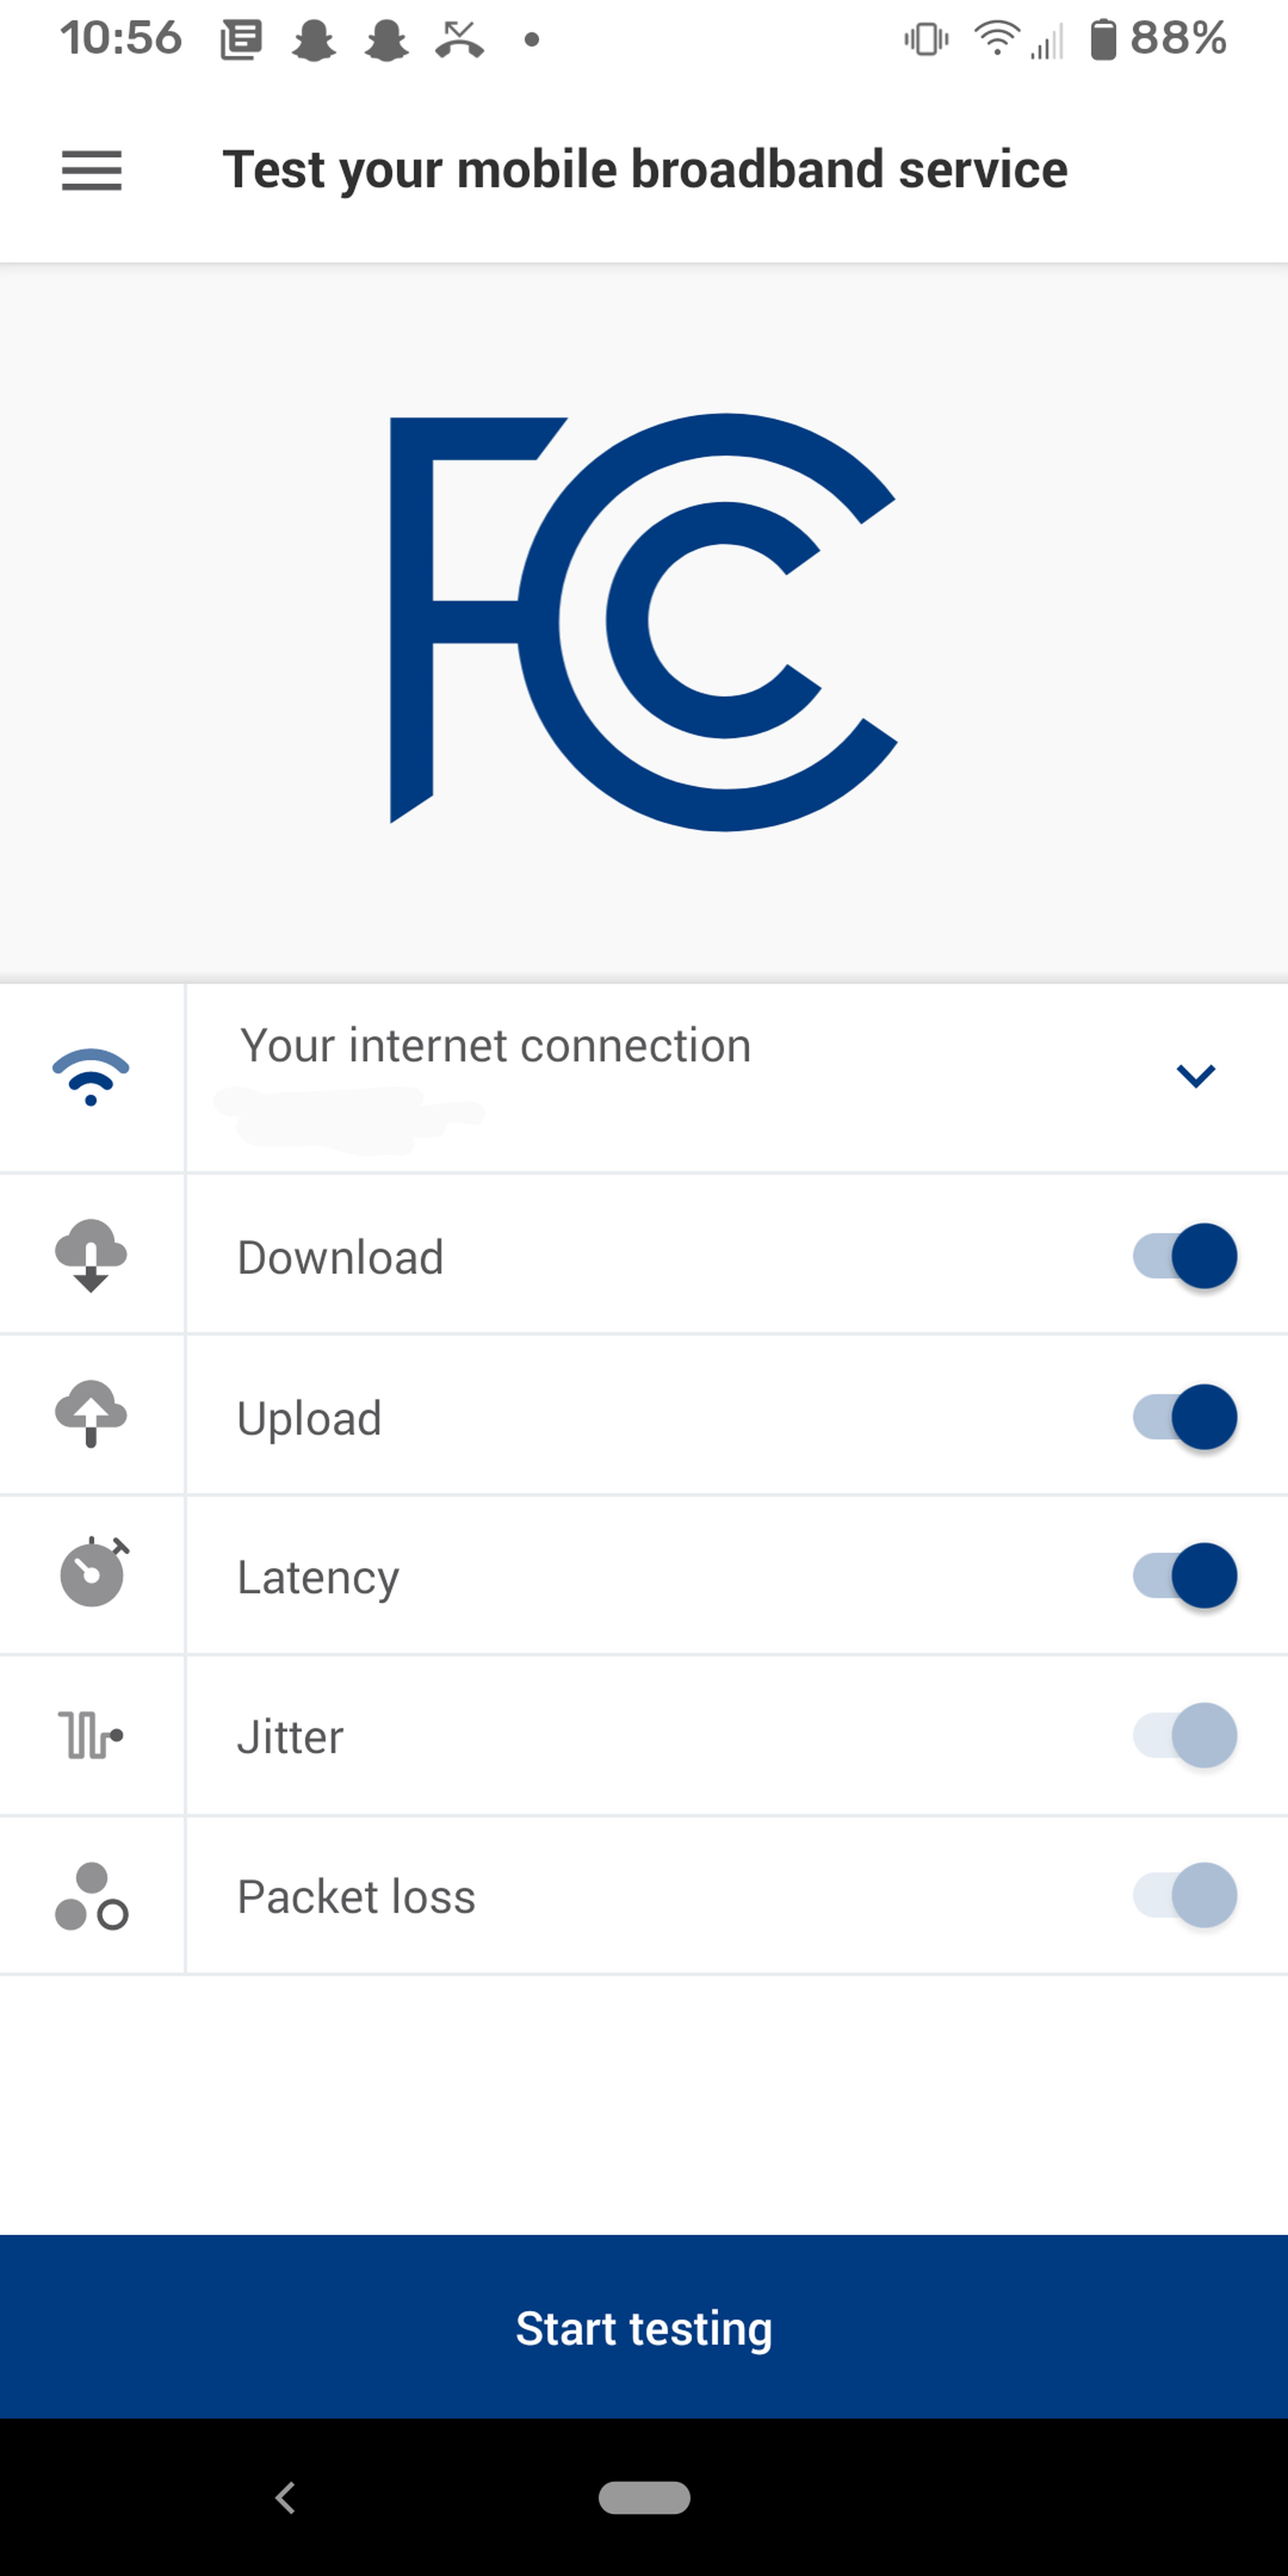 The FCC’s Speed Test app allows users to test their speeds and share the data.